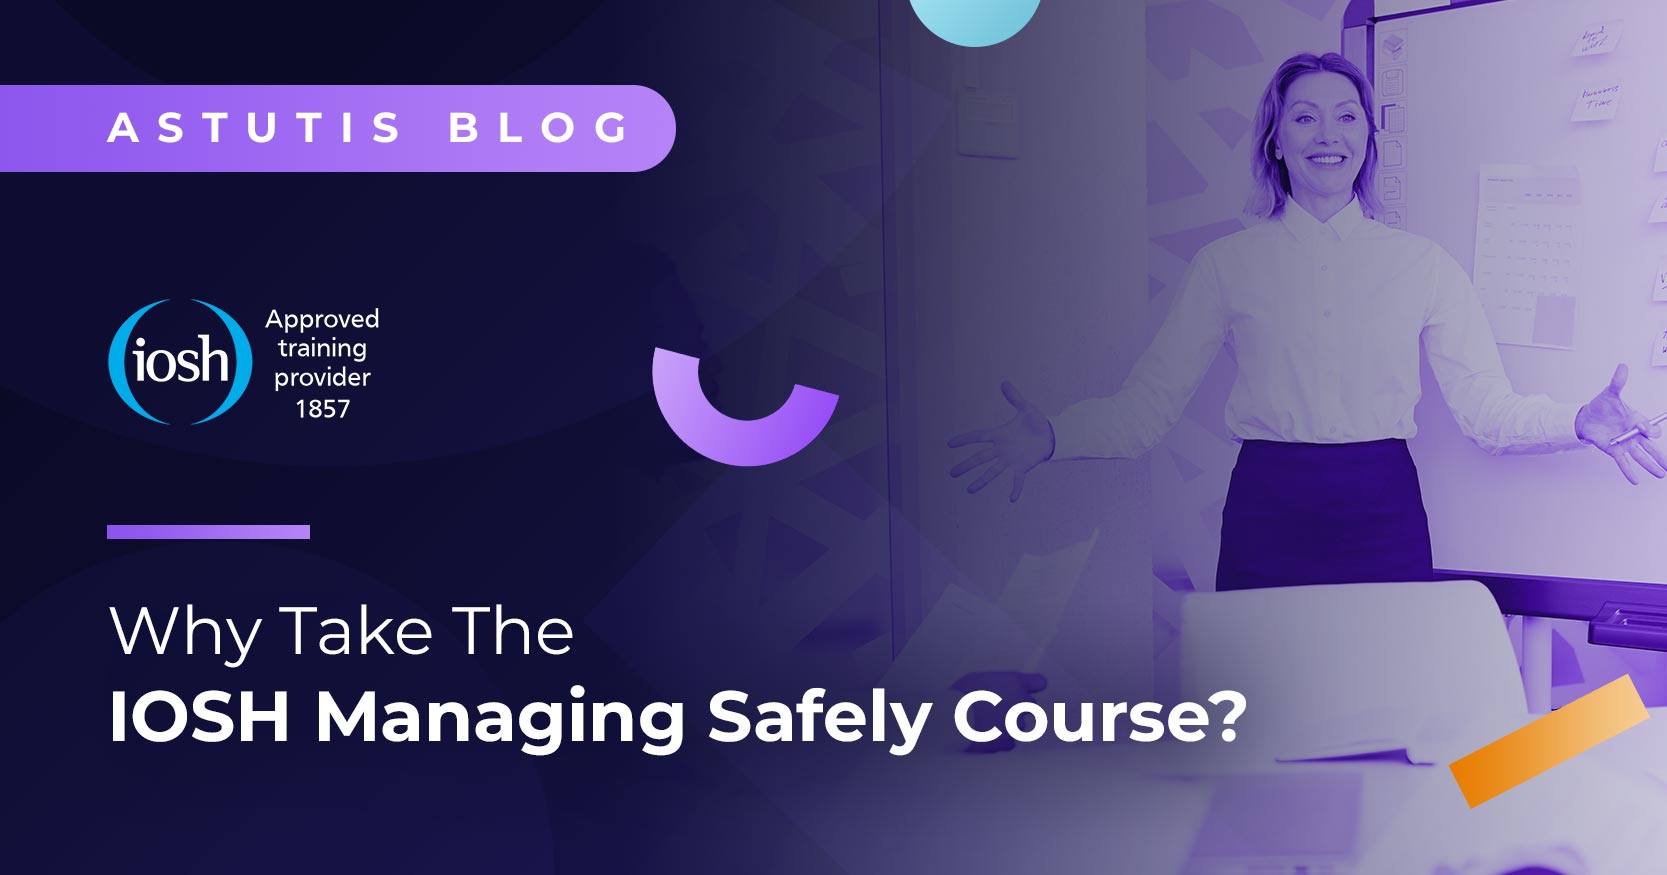 Why Take The IOSH Managing Safely Course? Image